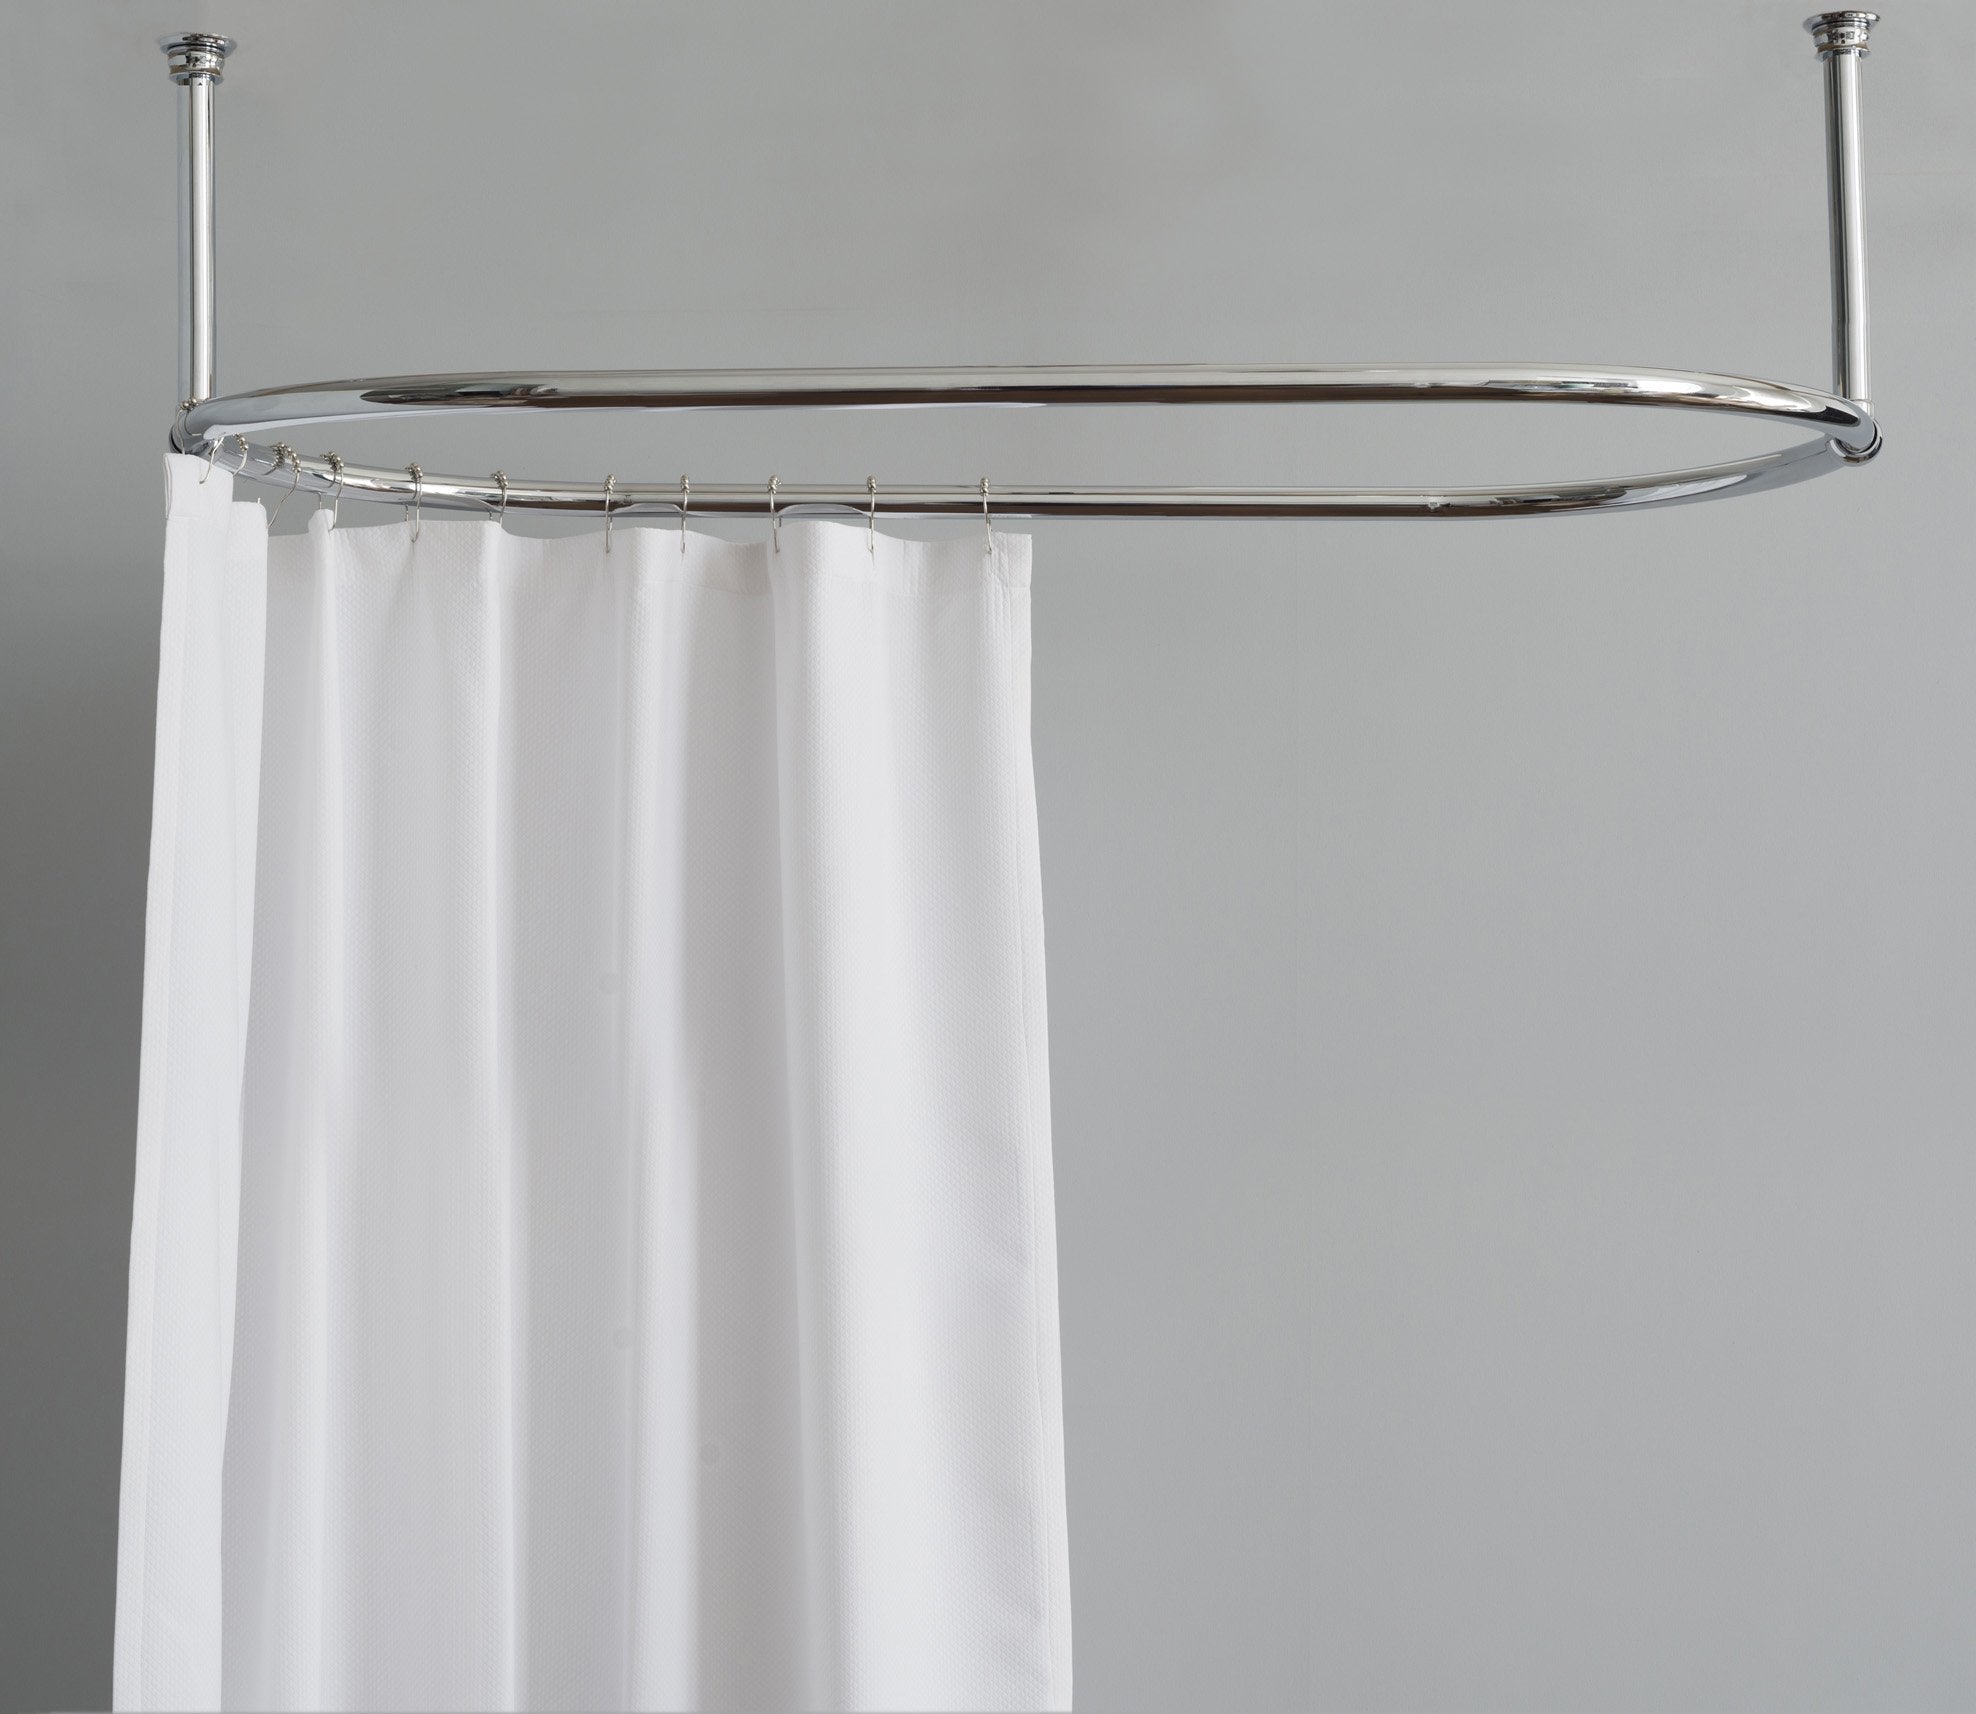 Shower Curtain Rail Oval Product Image 1